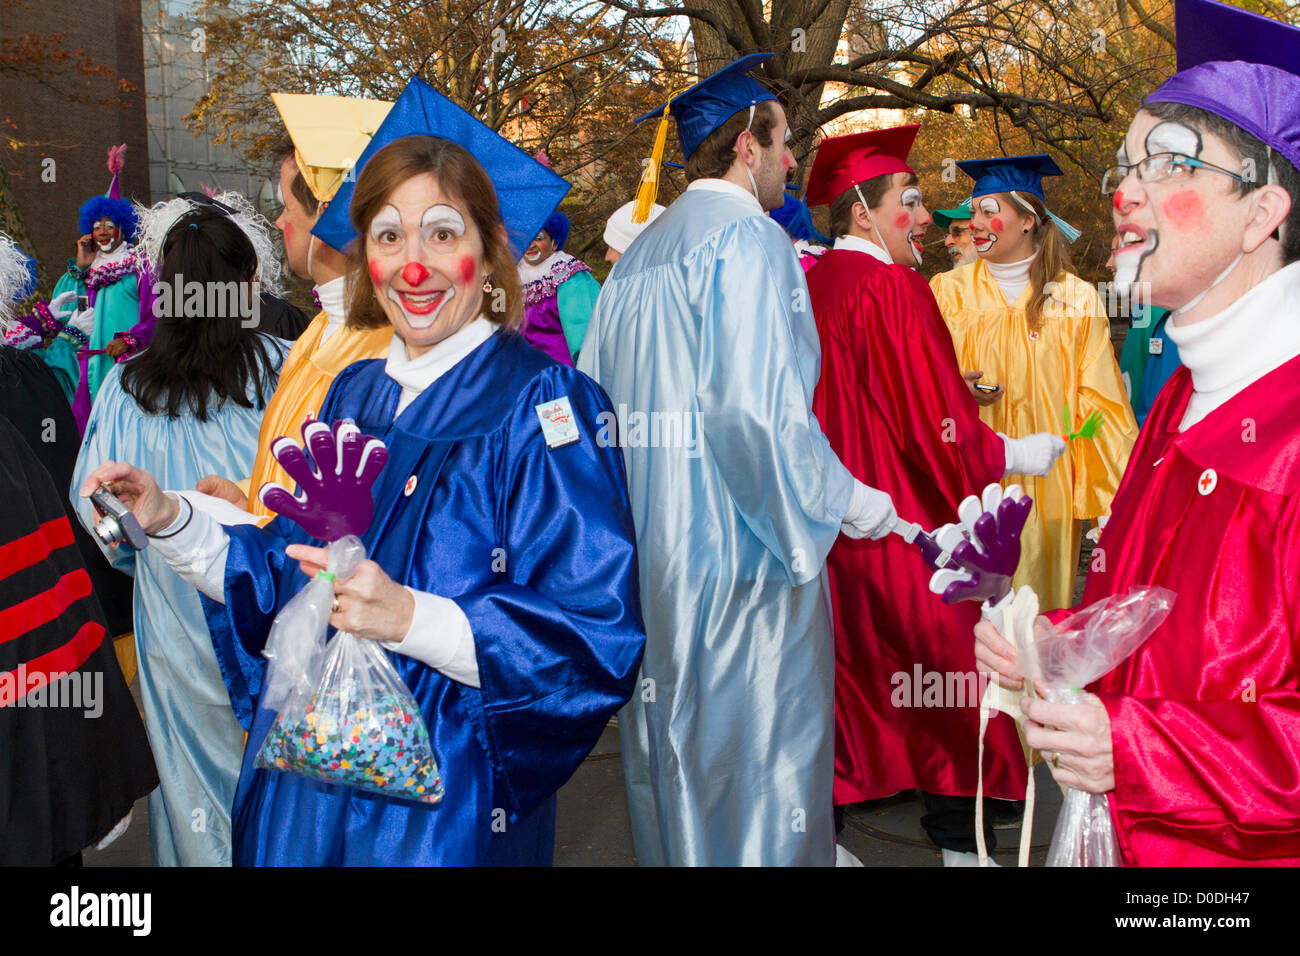 Clowns dressed as students await the start of Macy's Thanksgiving Day Parade in New York City, on Thursday, Nov. 22, 2012. Stock Photo